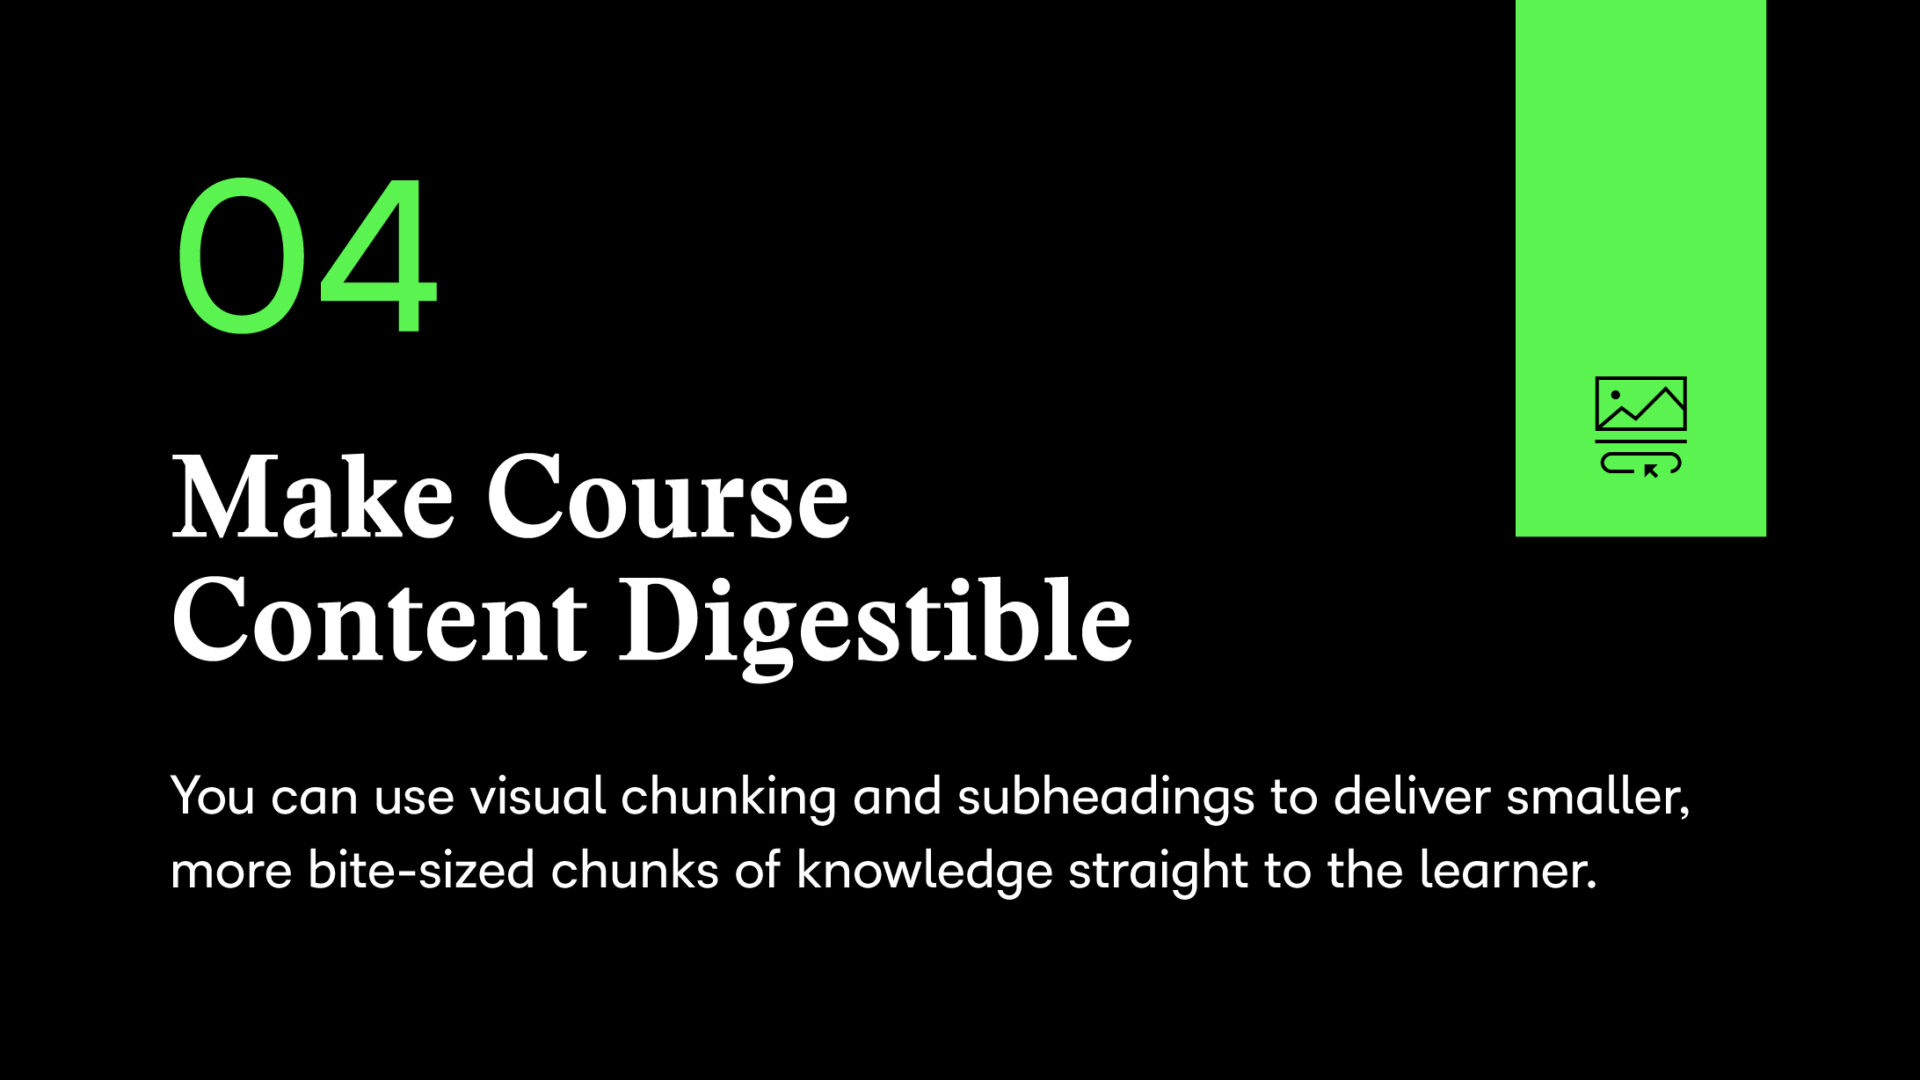 Make course content digestible